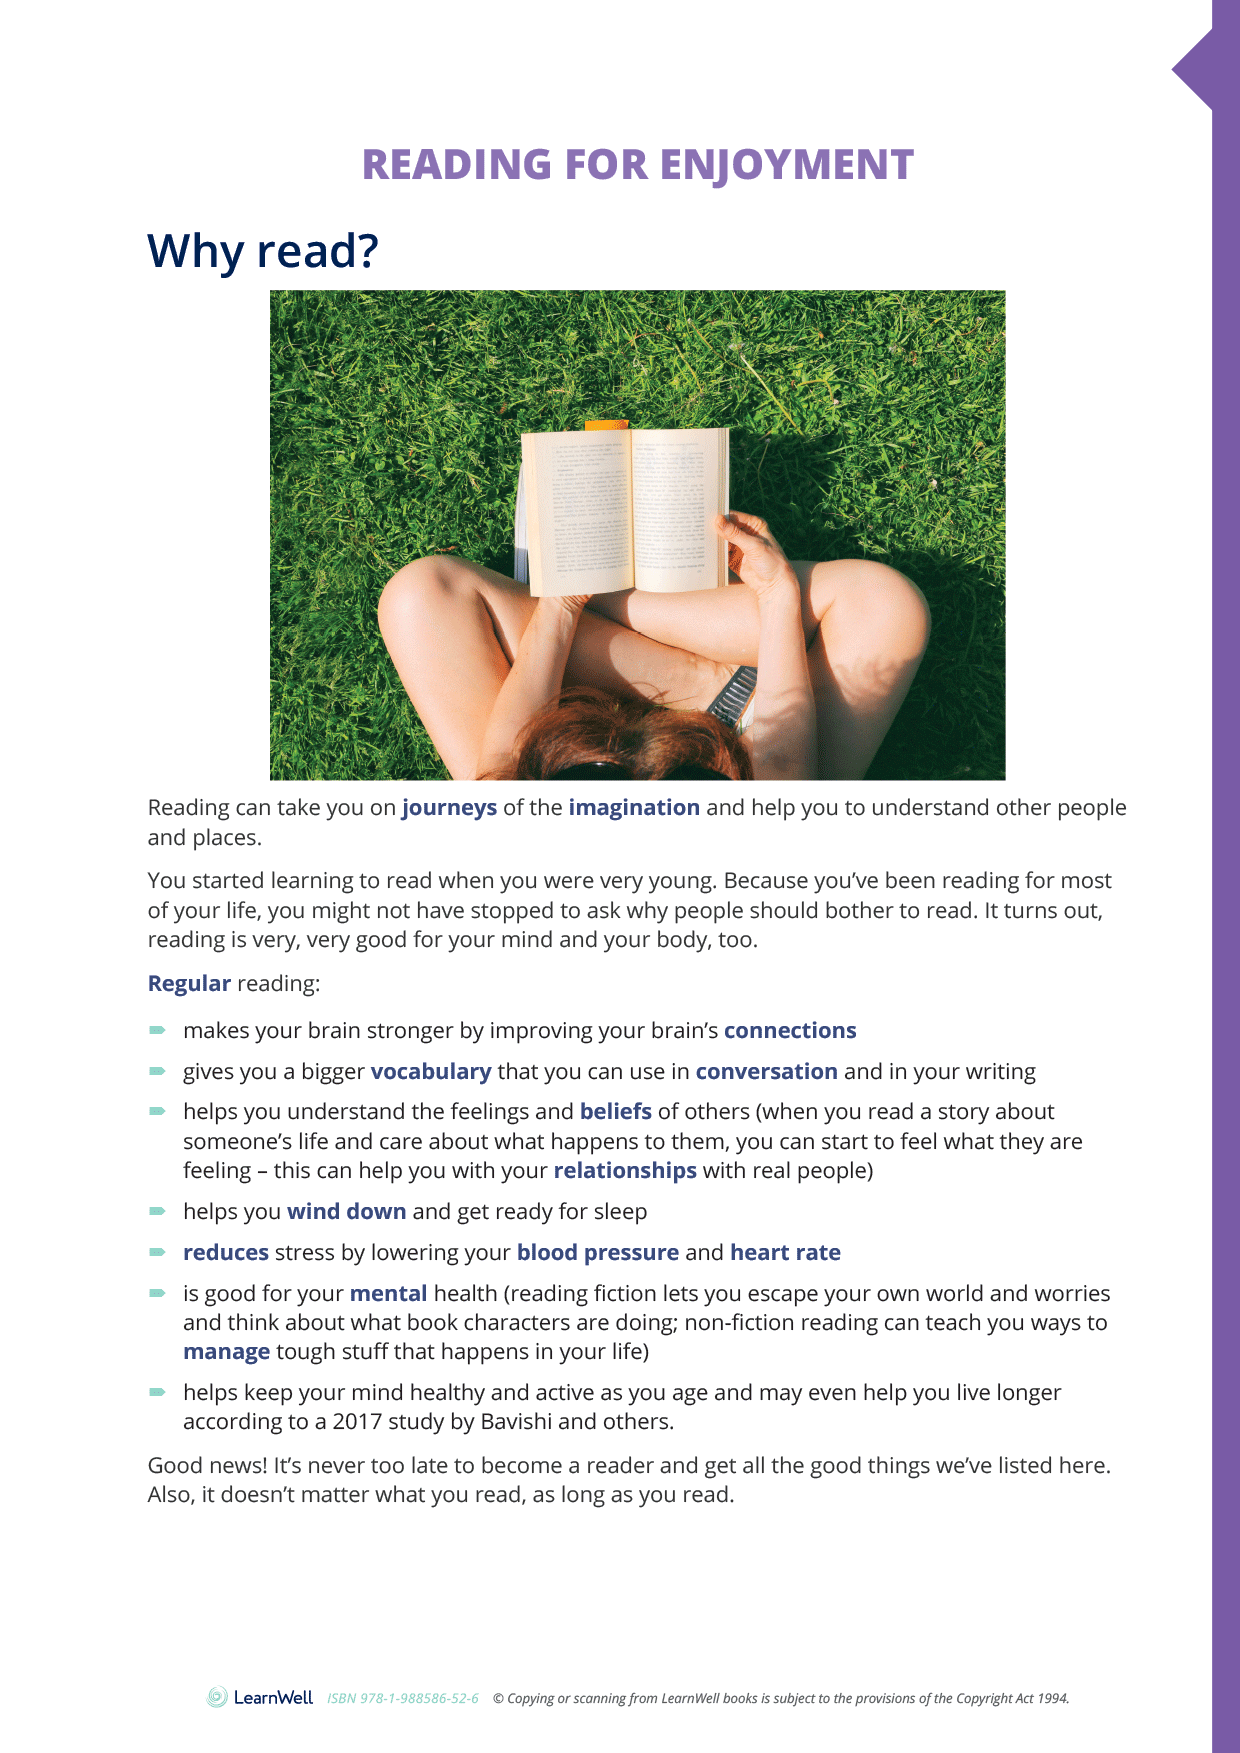 Year 9 Reading for Enjoyment Learning Guide